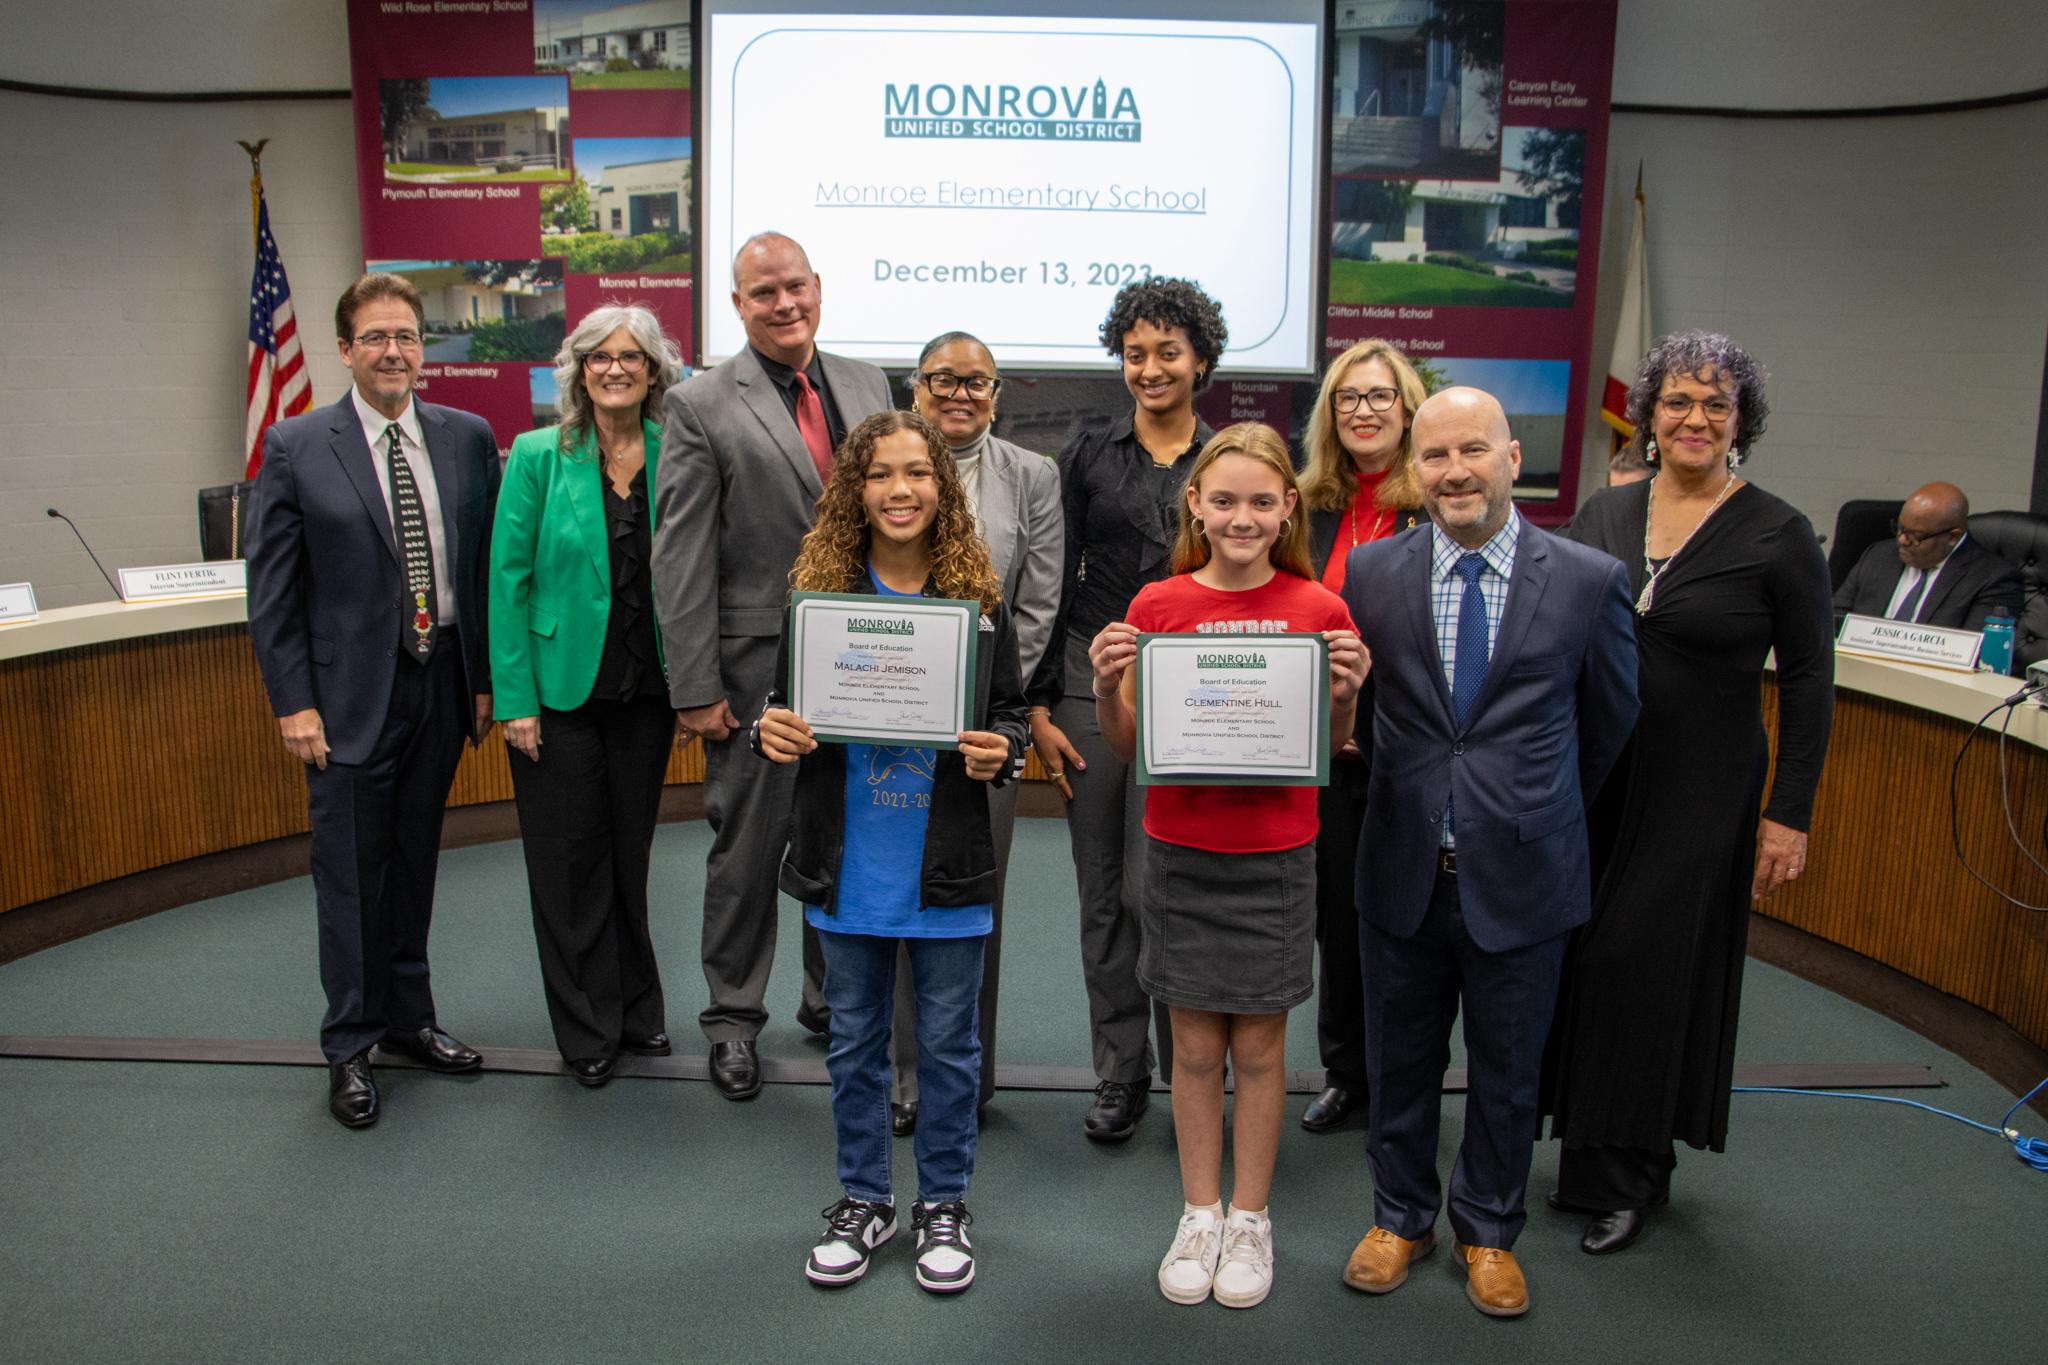 The Monrovia Unified Board of Education invited students from Monroe Elementary School to lead the Pledge of Allegiance in English and Spanish at its December meeting.